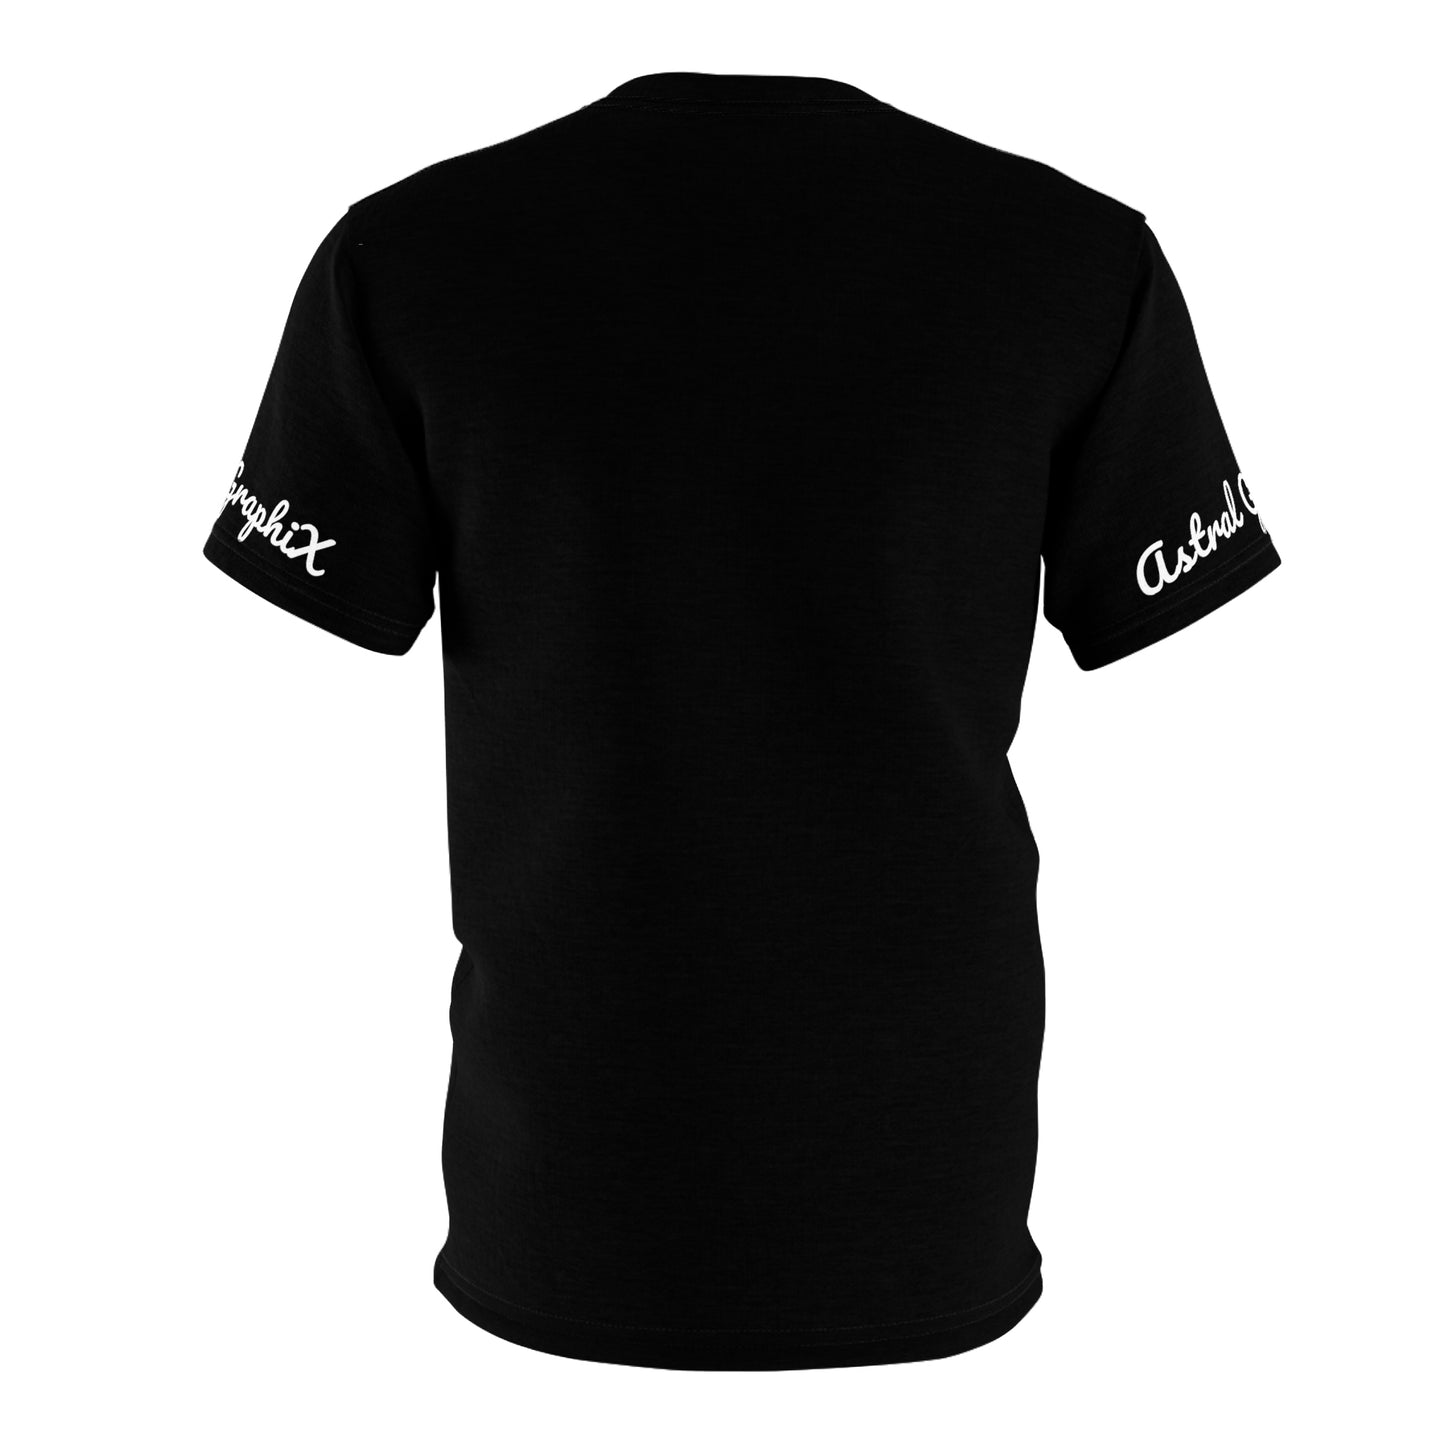 Word Art Collection - Unisex AOP Cut & Sew Tee - Get Your Dream in Black